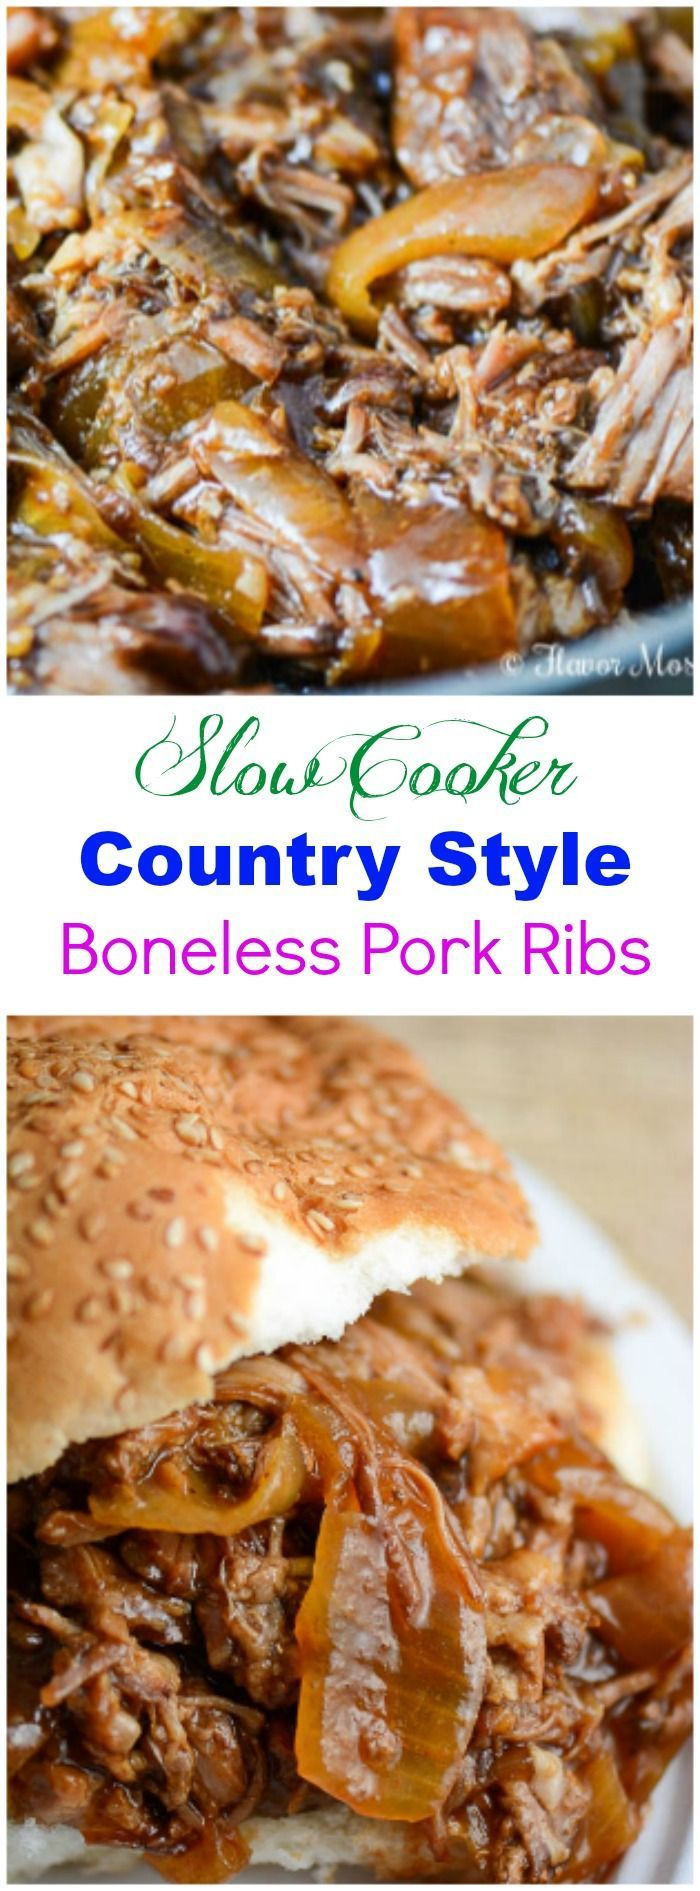 Boneless Country Style Pork Ribs Slow Cooker
 Slow Cooker Country Style Boneless Pork Ribs are sweet